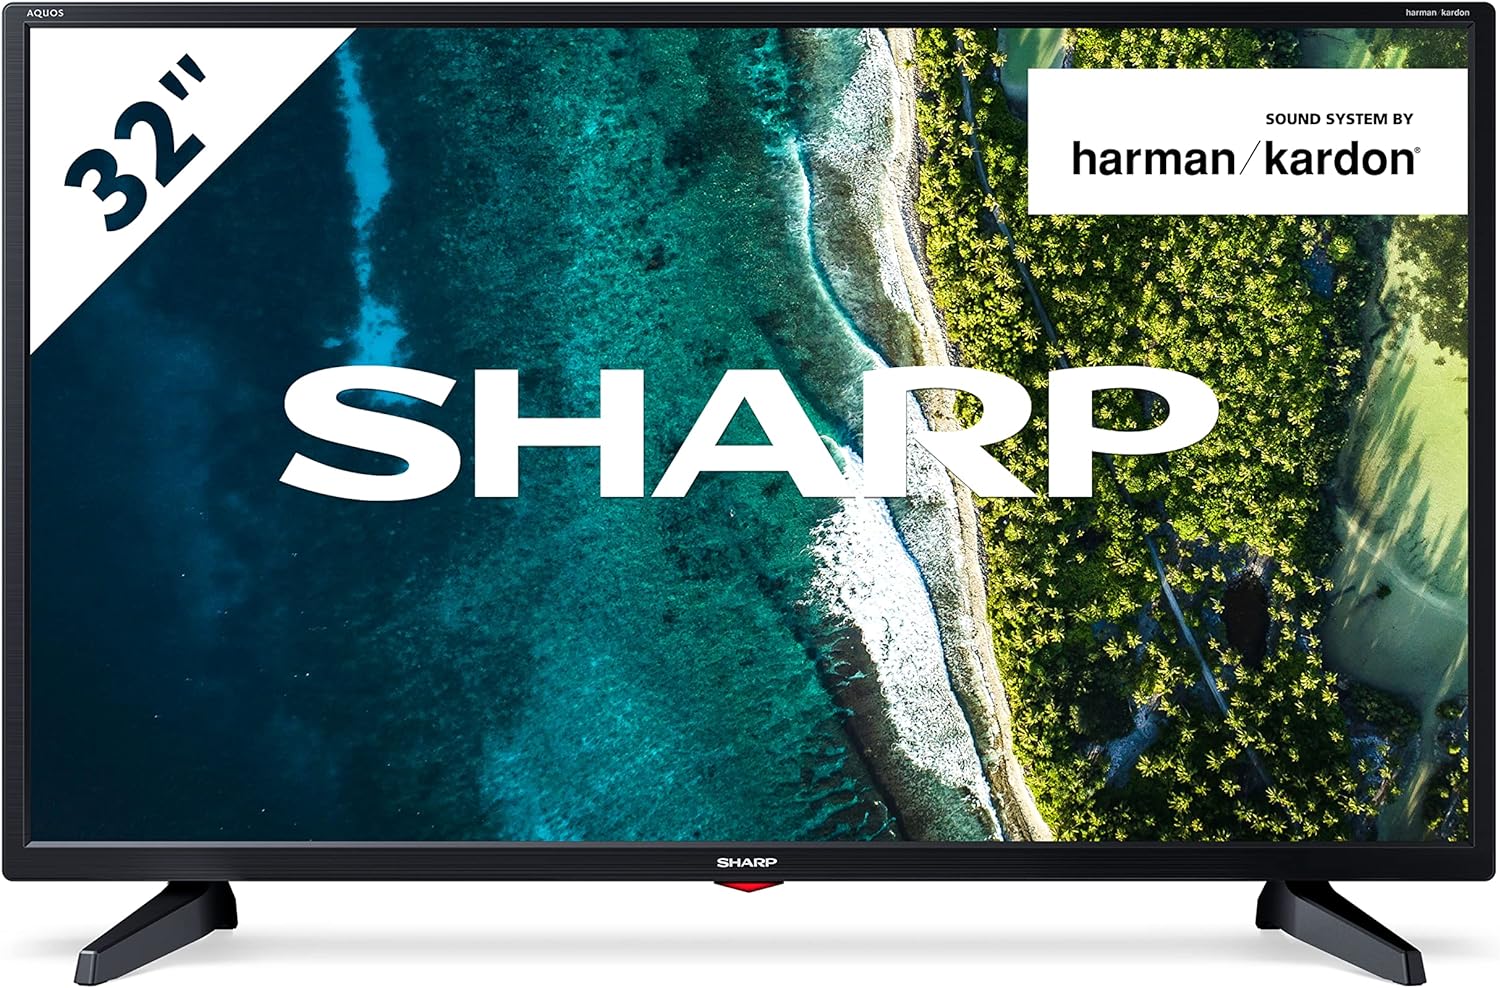 SHARP 1T - C24EE6KC2FB 24 Inch Smart TV, HD Ready LED Display with DTS Virtual X, Dolby Digital Audio Decoder, Freeview Play and Wireless Streaming - Black, Energy Class F (Amazon Exclusive) - Amazing Gadgets Outlet